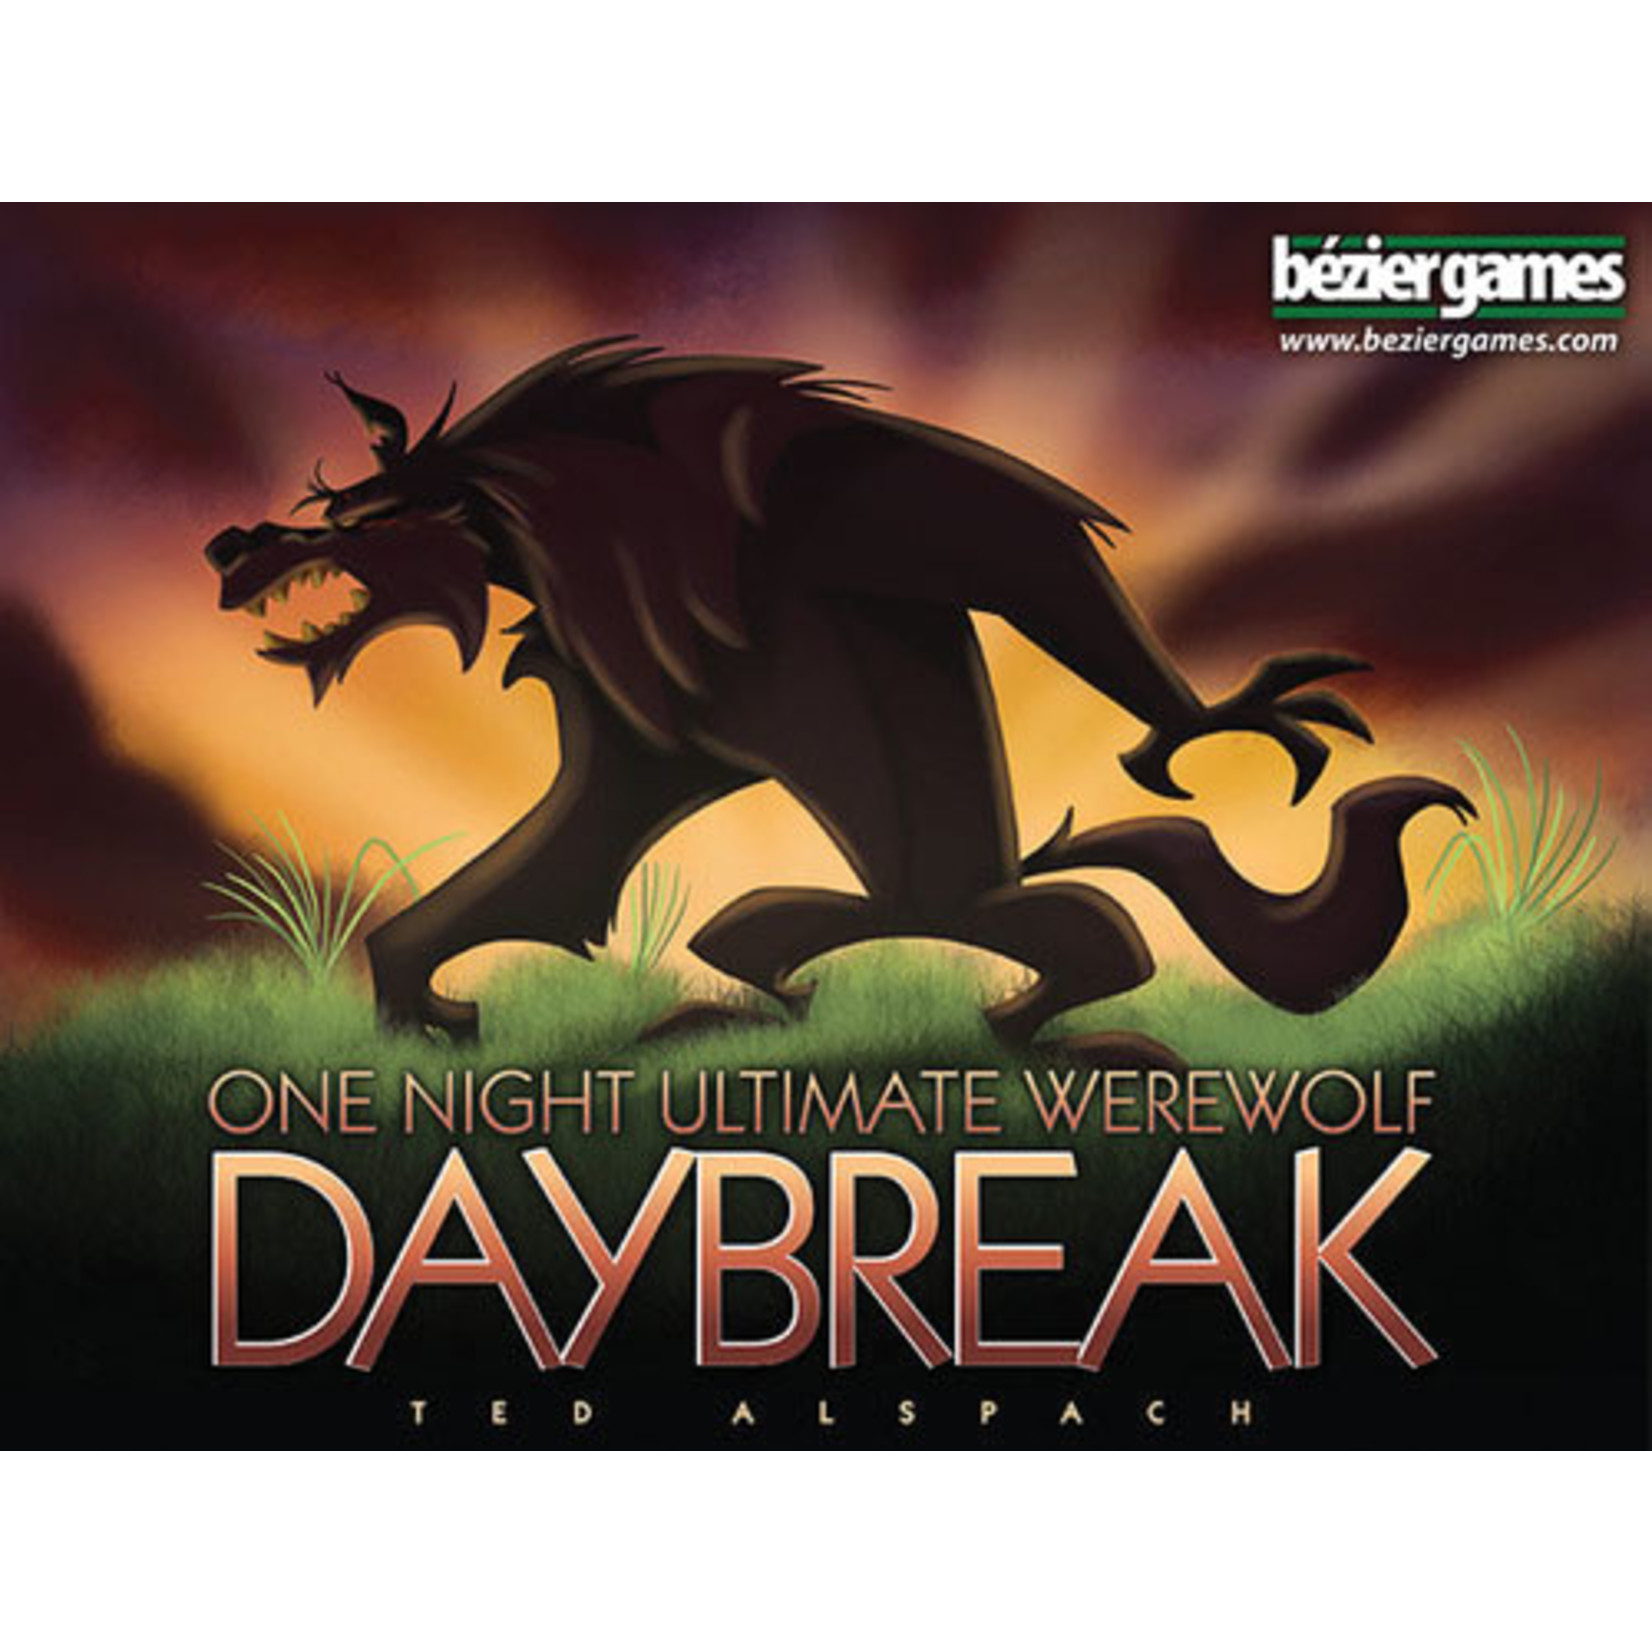 One Night One Night: Ultimate Werewolf - Daybreak (stand alone or expansion)